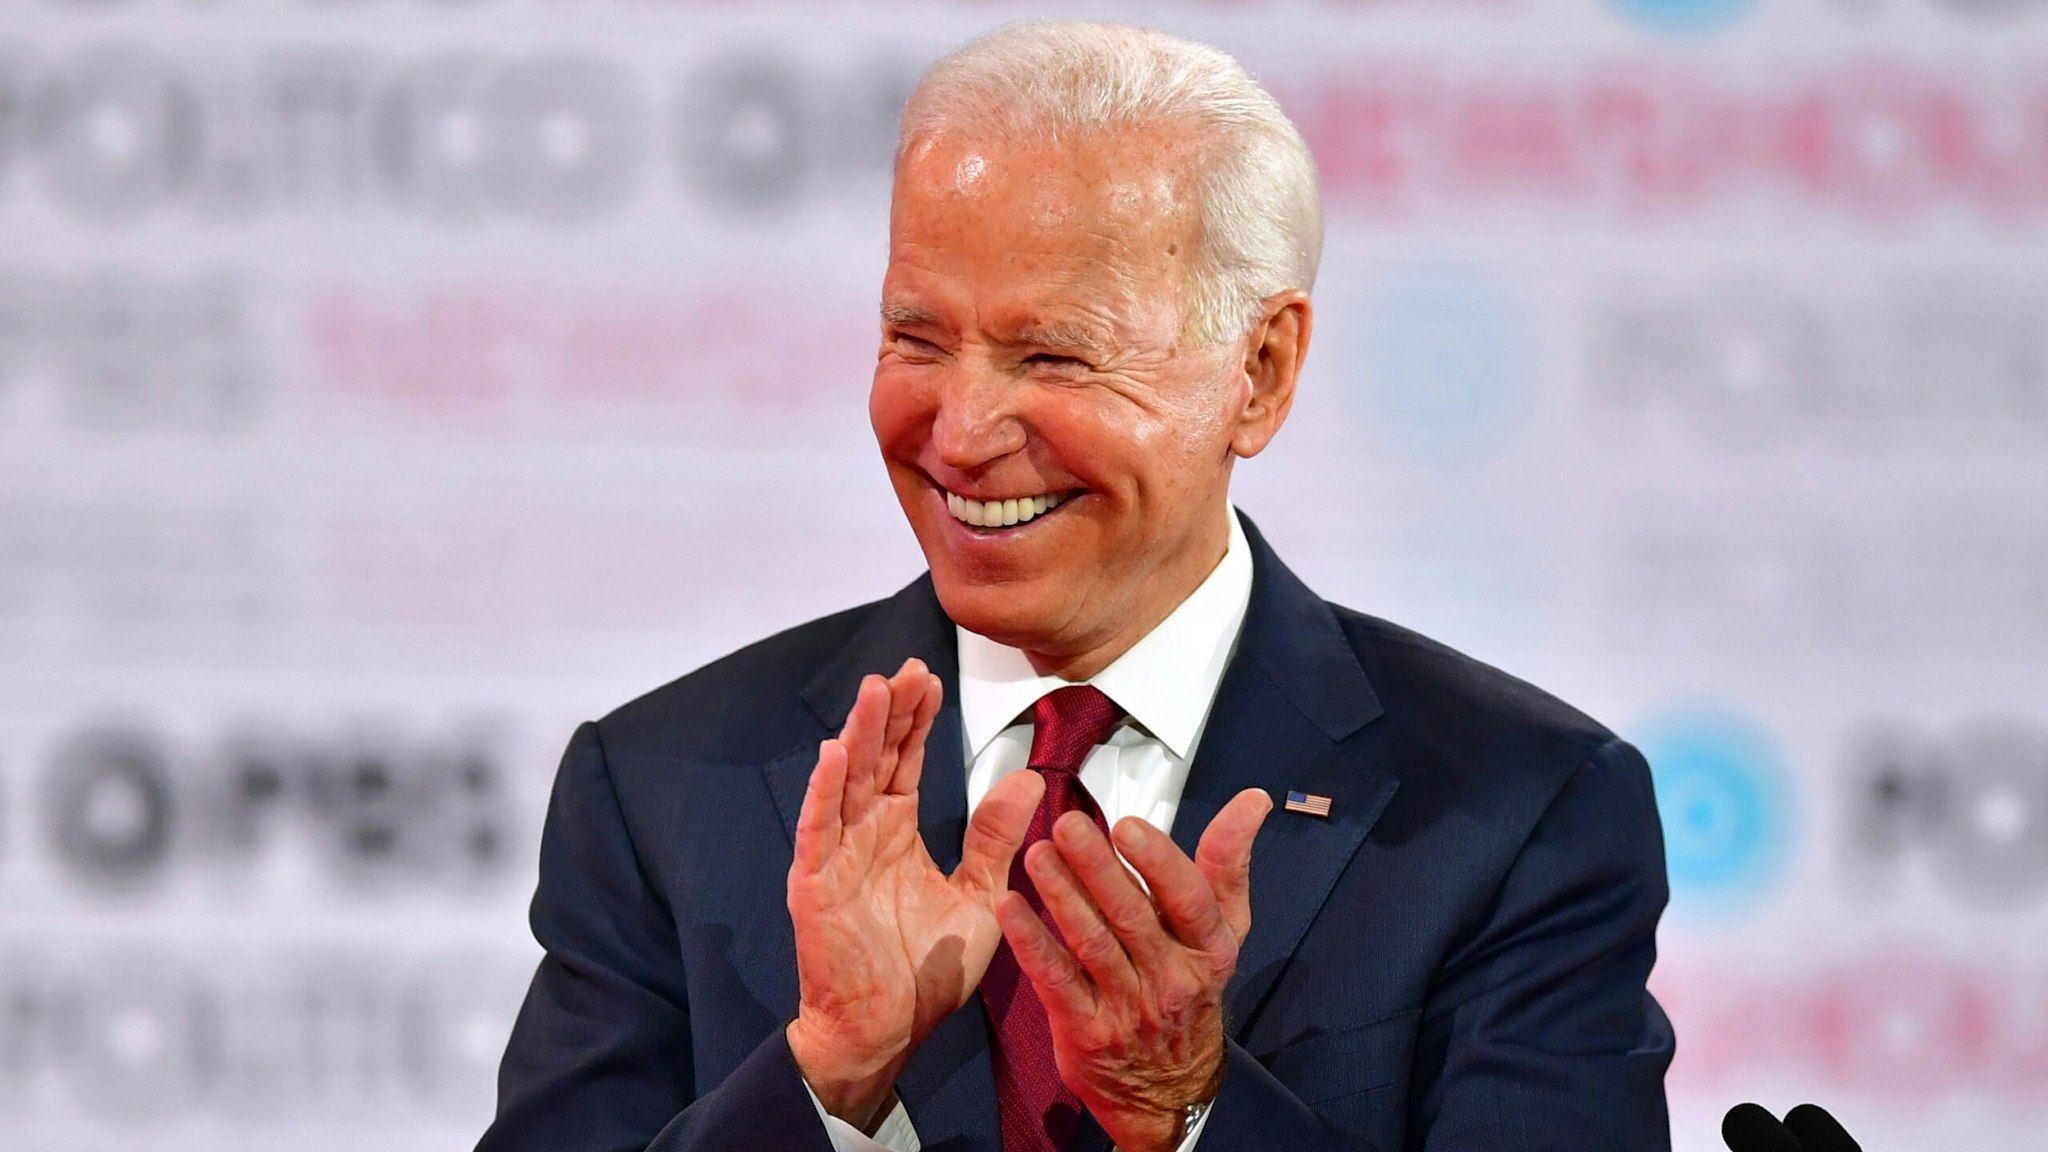 Democratic presidential hopeful former Vice President Joe Biden laughs during the sixth Democratic primary debate of the 2020 presidential campaign season co-hosted by PBS NewsHour &amp; Politico at Loyola Marymount University in Los Angeles, California on December 19, 2019.